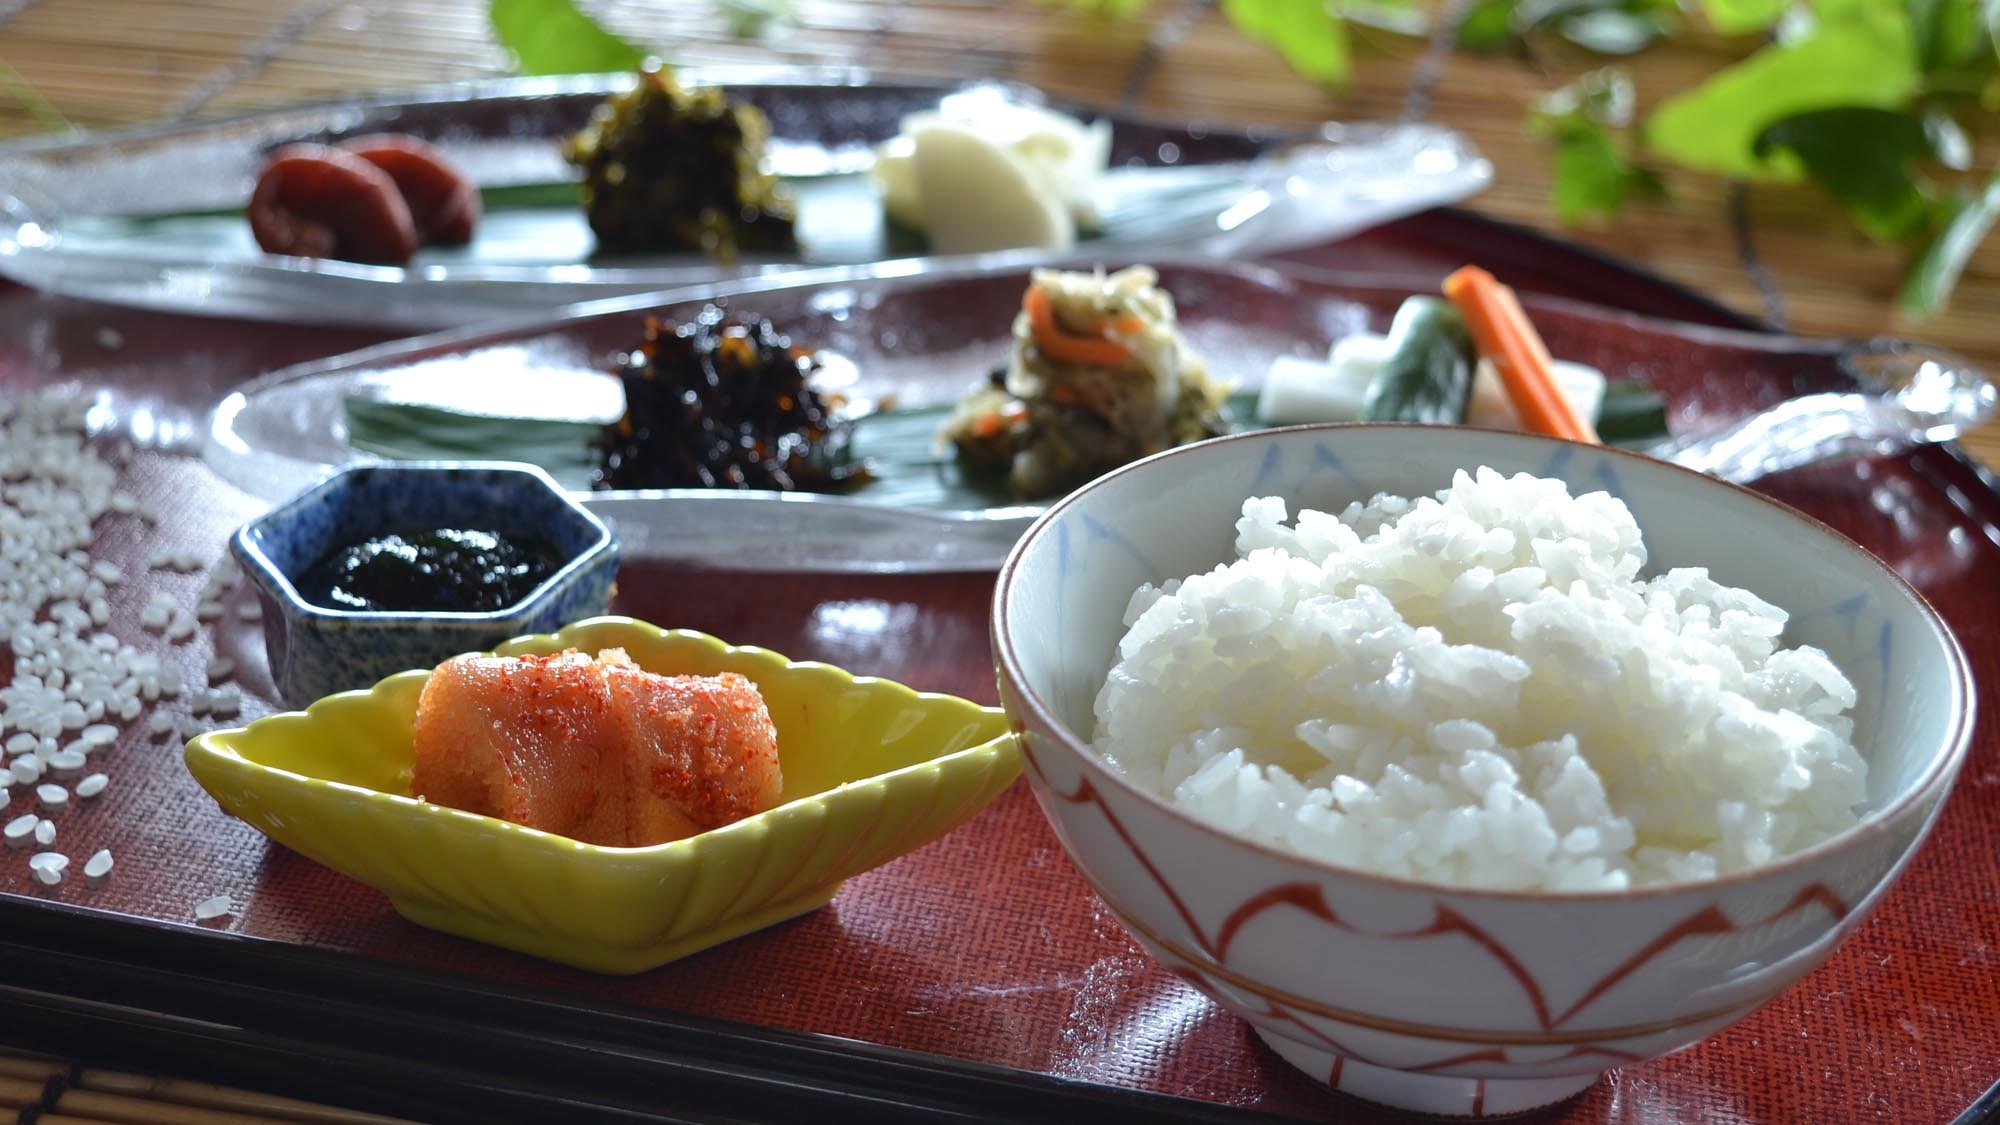 ◆ White rice (image): Freshly cooked white rice and rice companion.